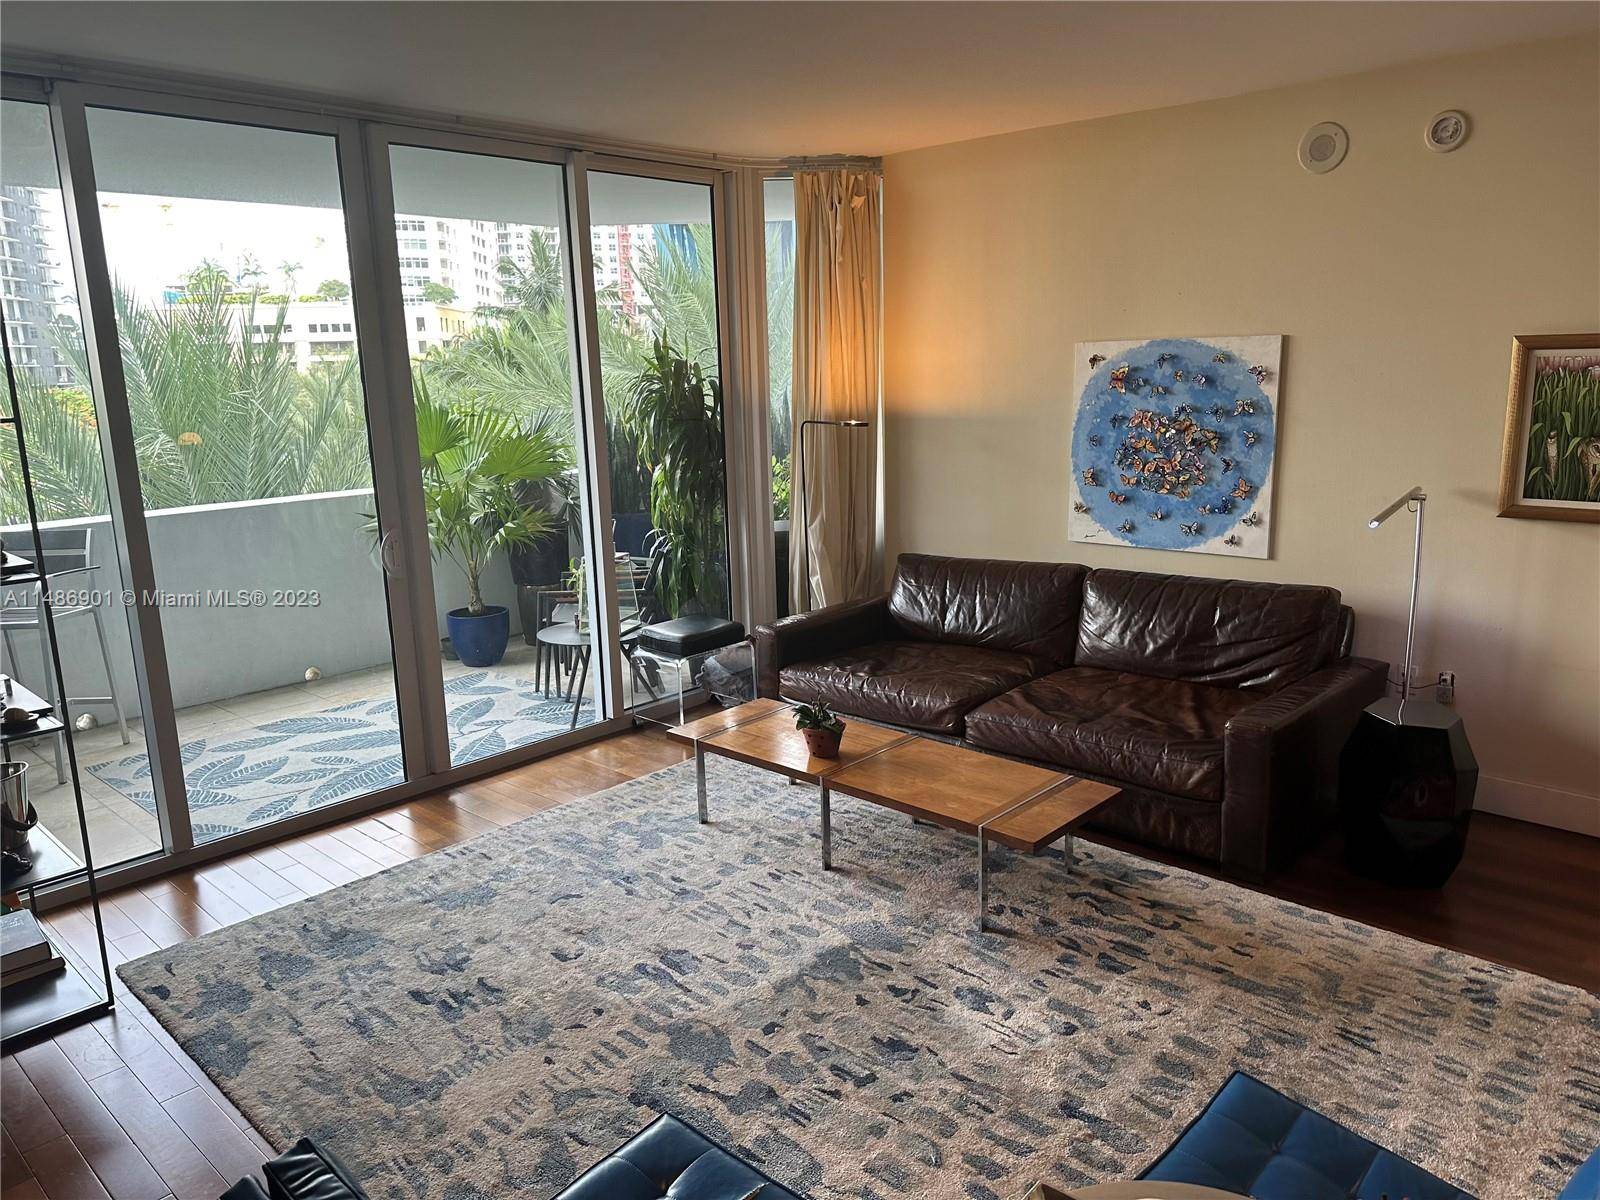 Luxurious one bedroom residence in the iconic Las Olas River House, Fort Lauderdale.